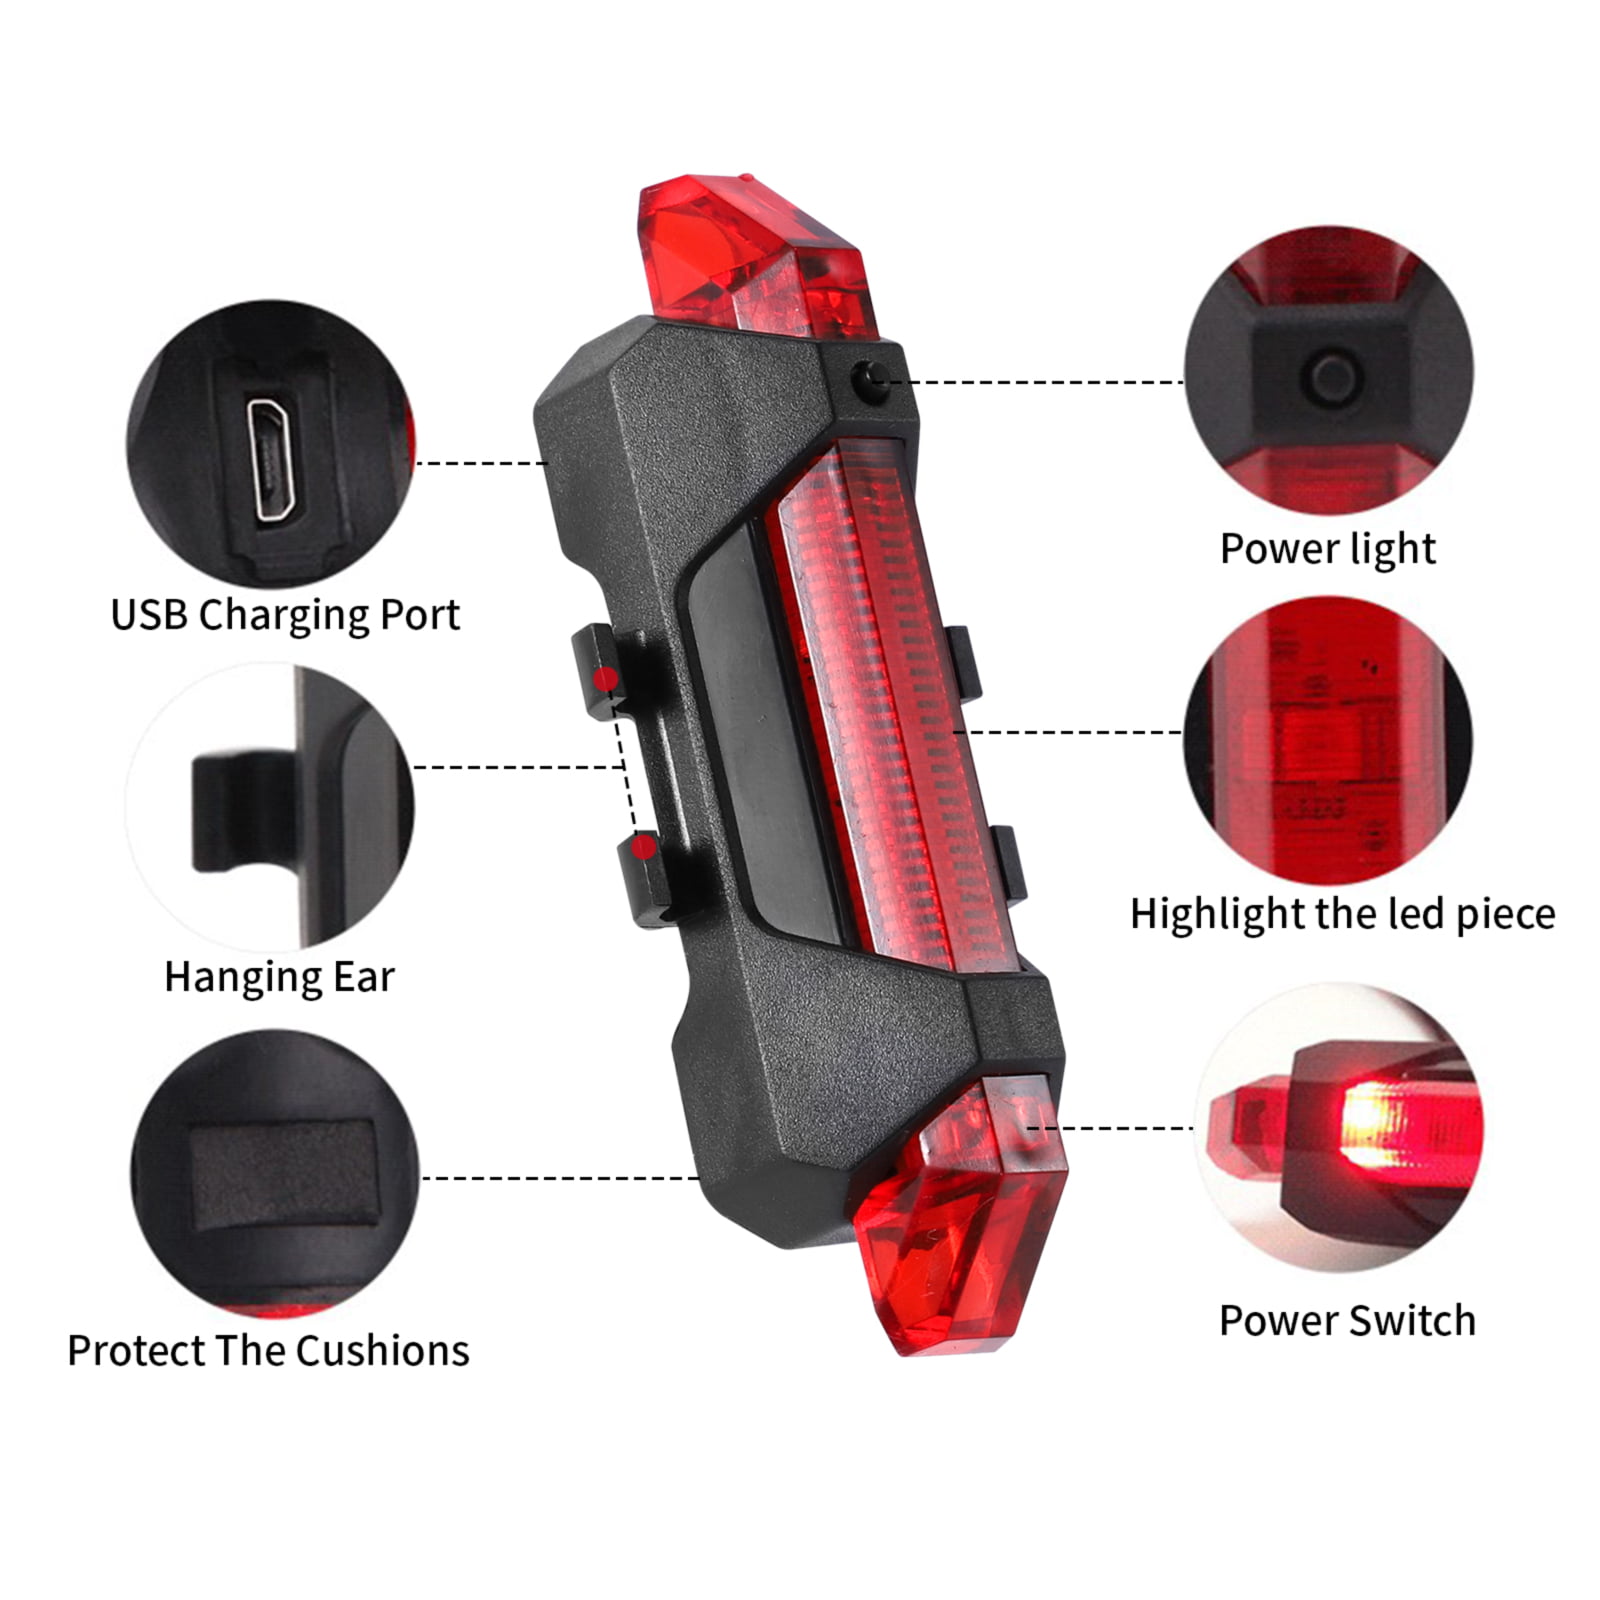 5 LED USB Rechargeable Bicycle Tail Light Bike Safety Cycling Warning Rear Lamp 